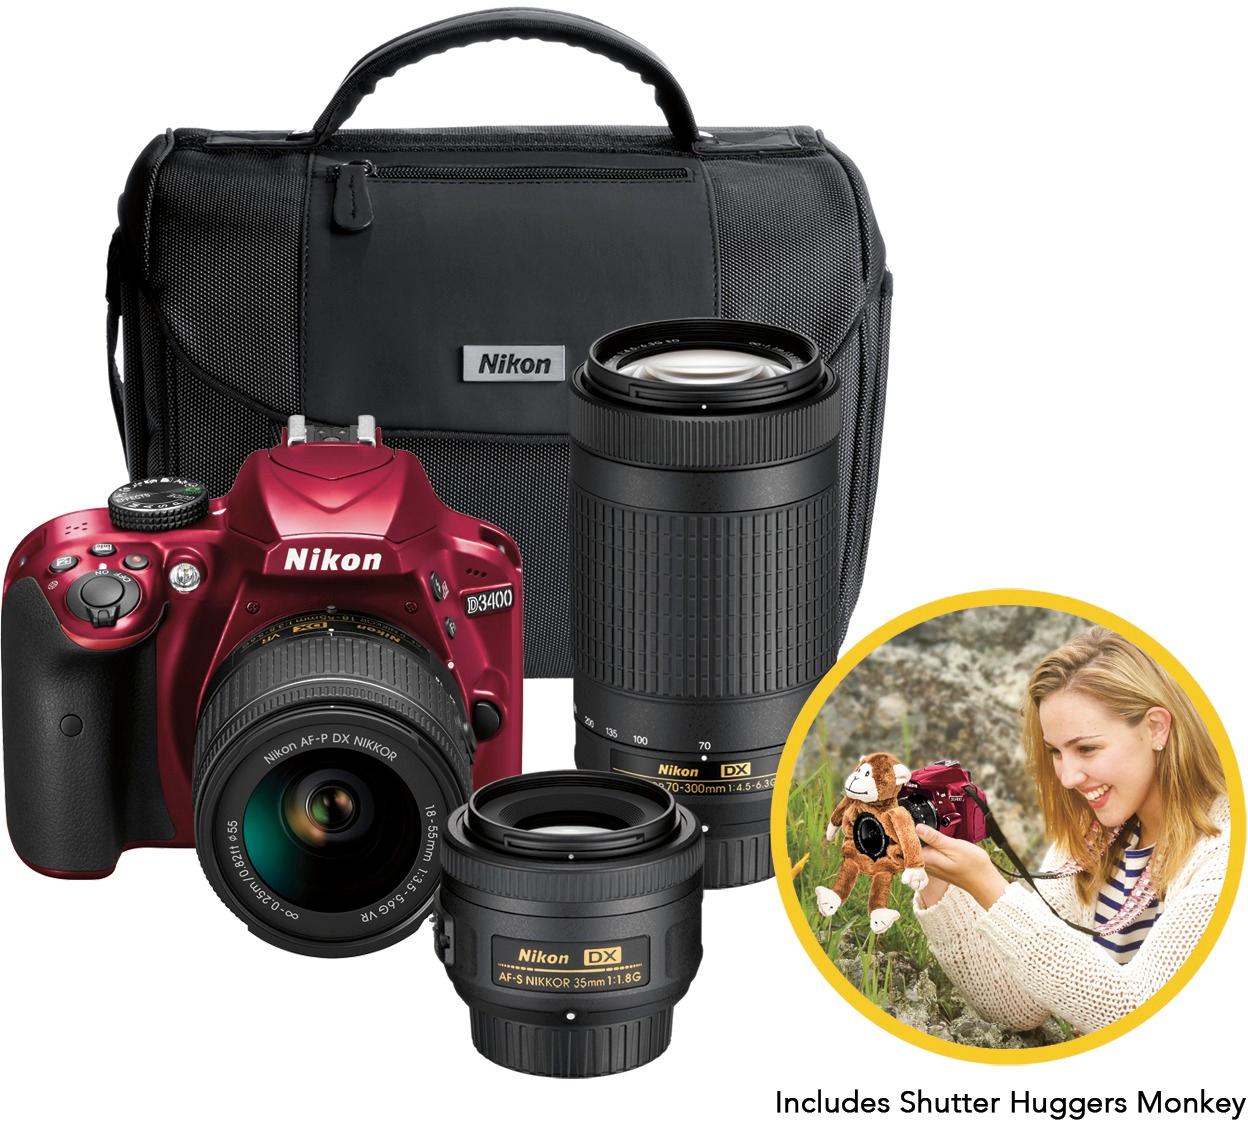 Best Buy: Nikon D3400 DSLR Camera with 18-55mm, 70-300mm and 35mm